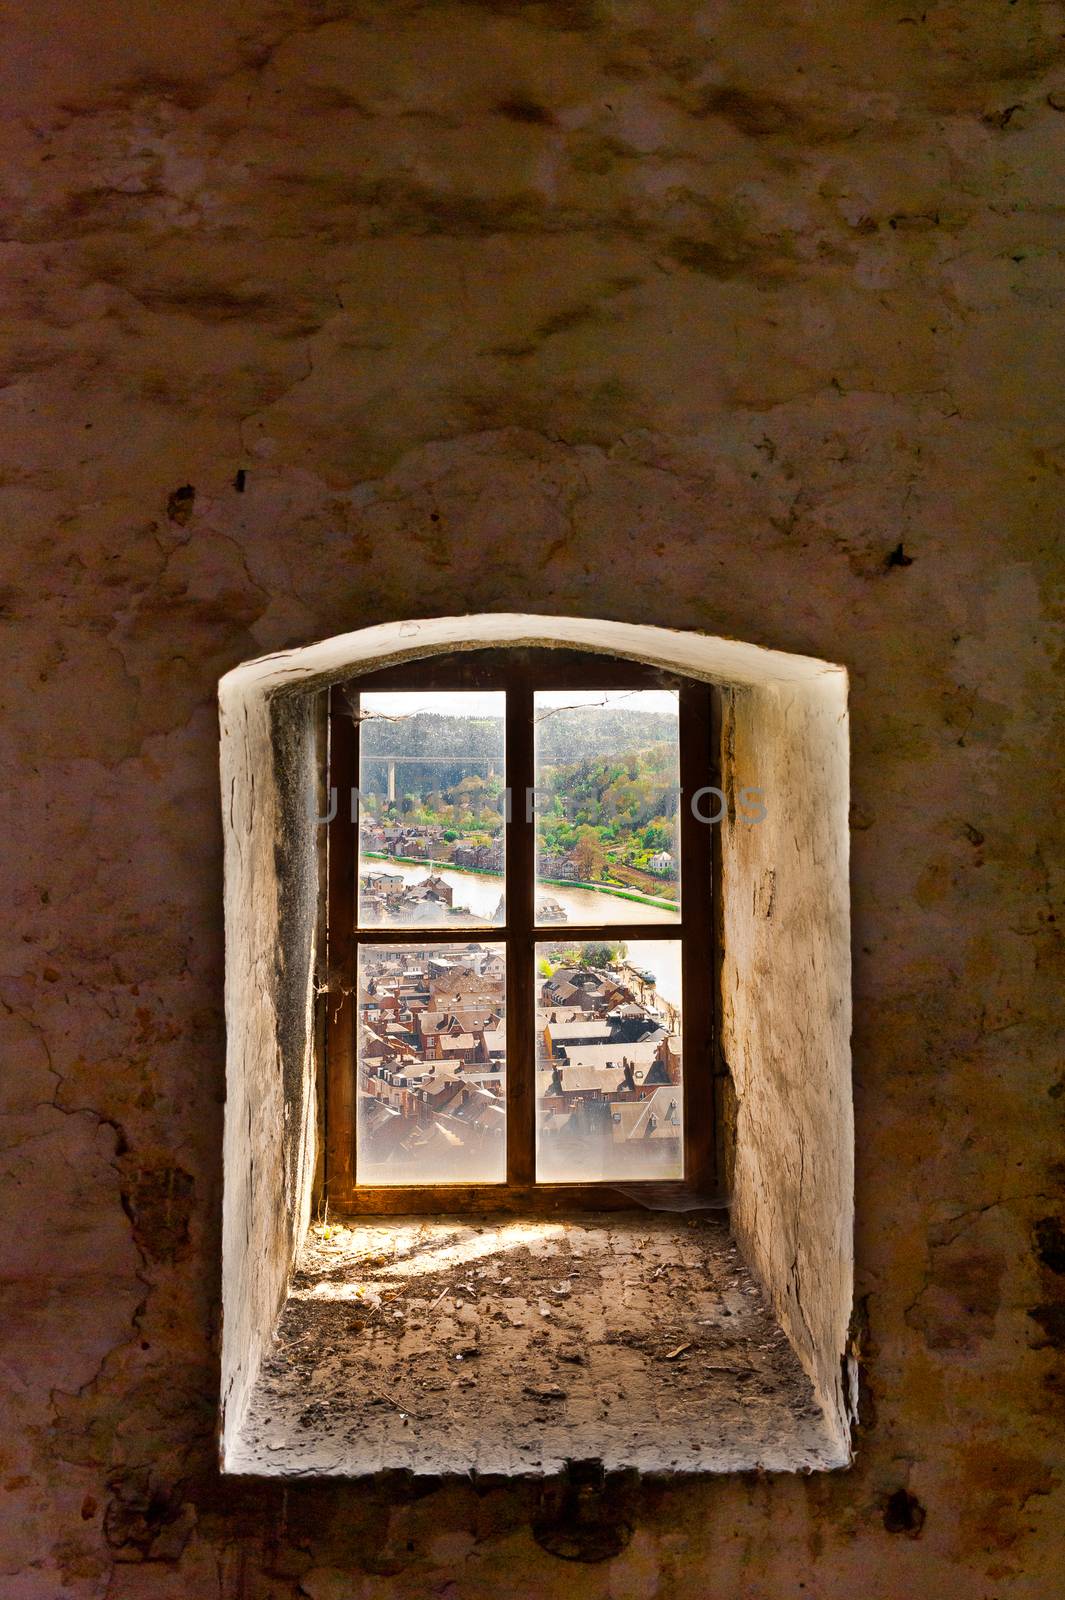 Aerial View from Dirty, Covered with Cobwebs, Window of the Fortress to the Embankment of the River Meuse in the Belgian City of Dinant